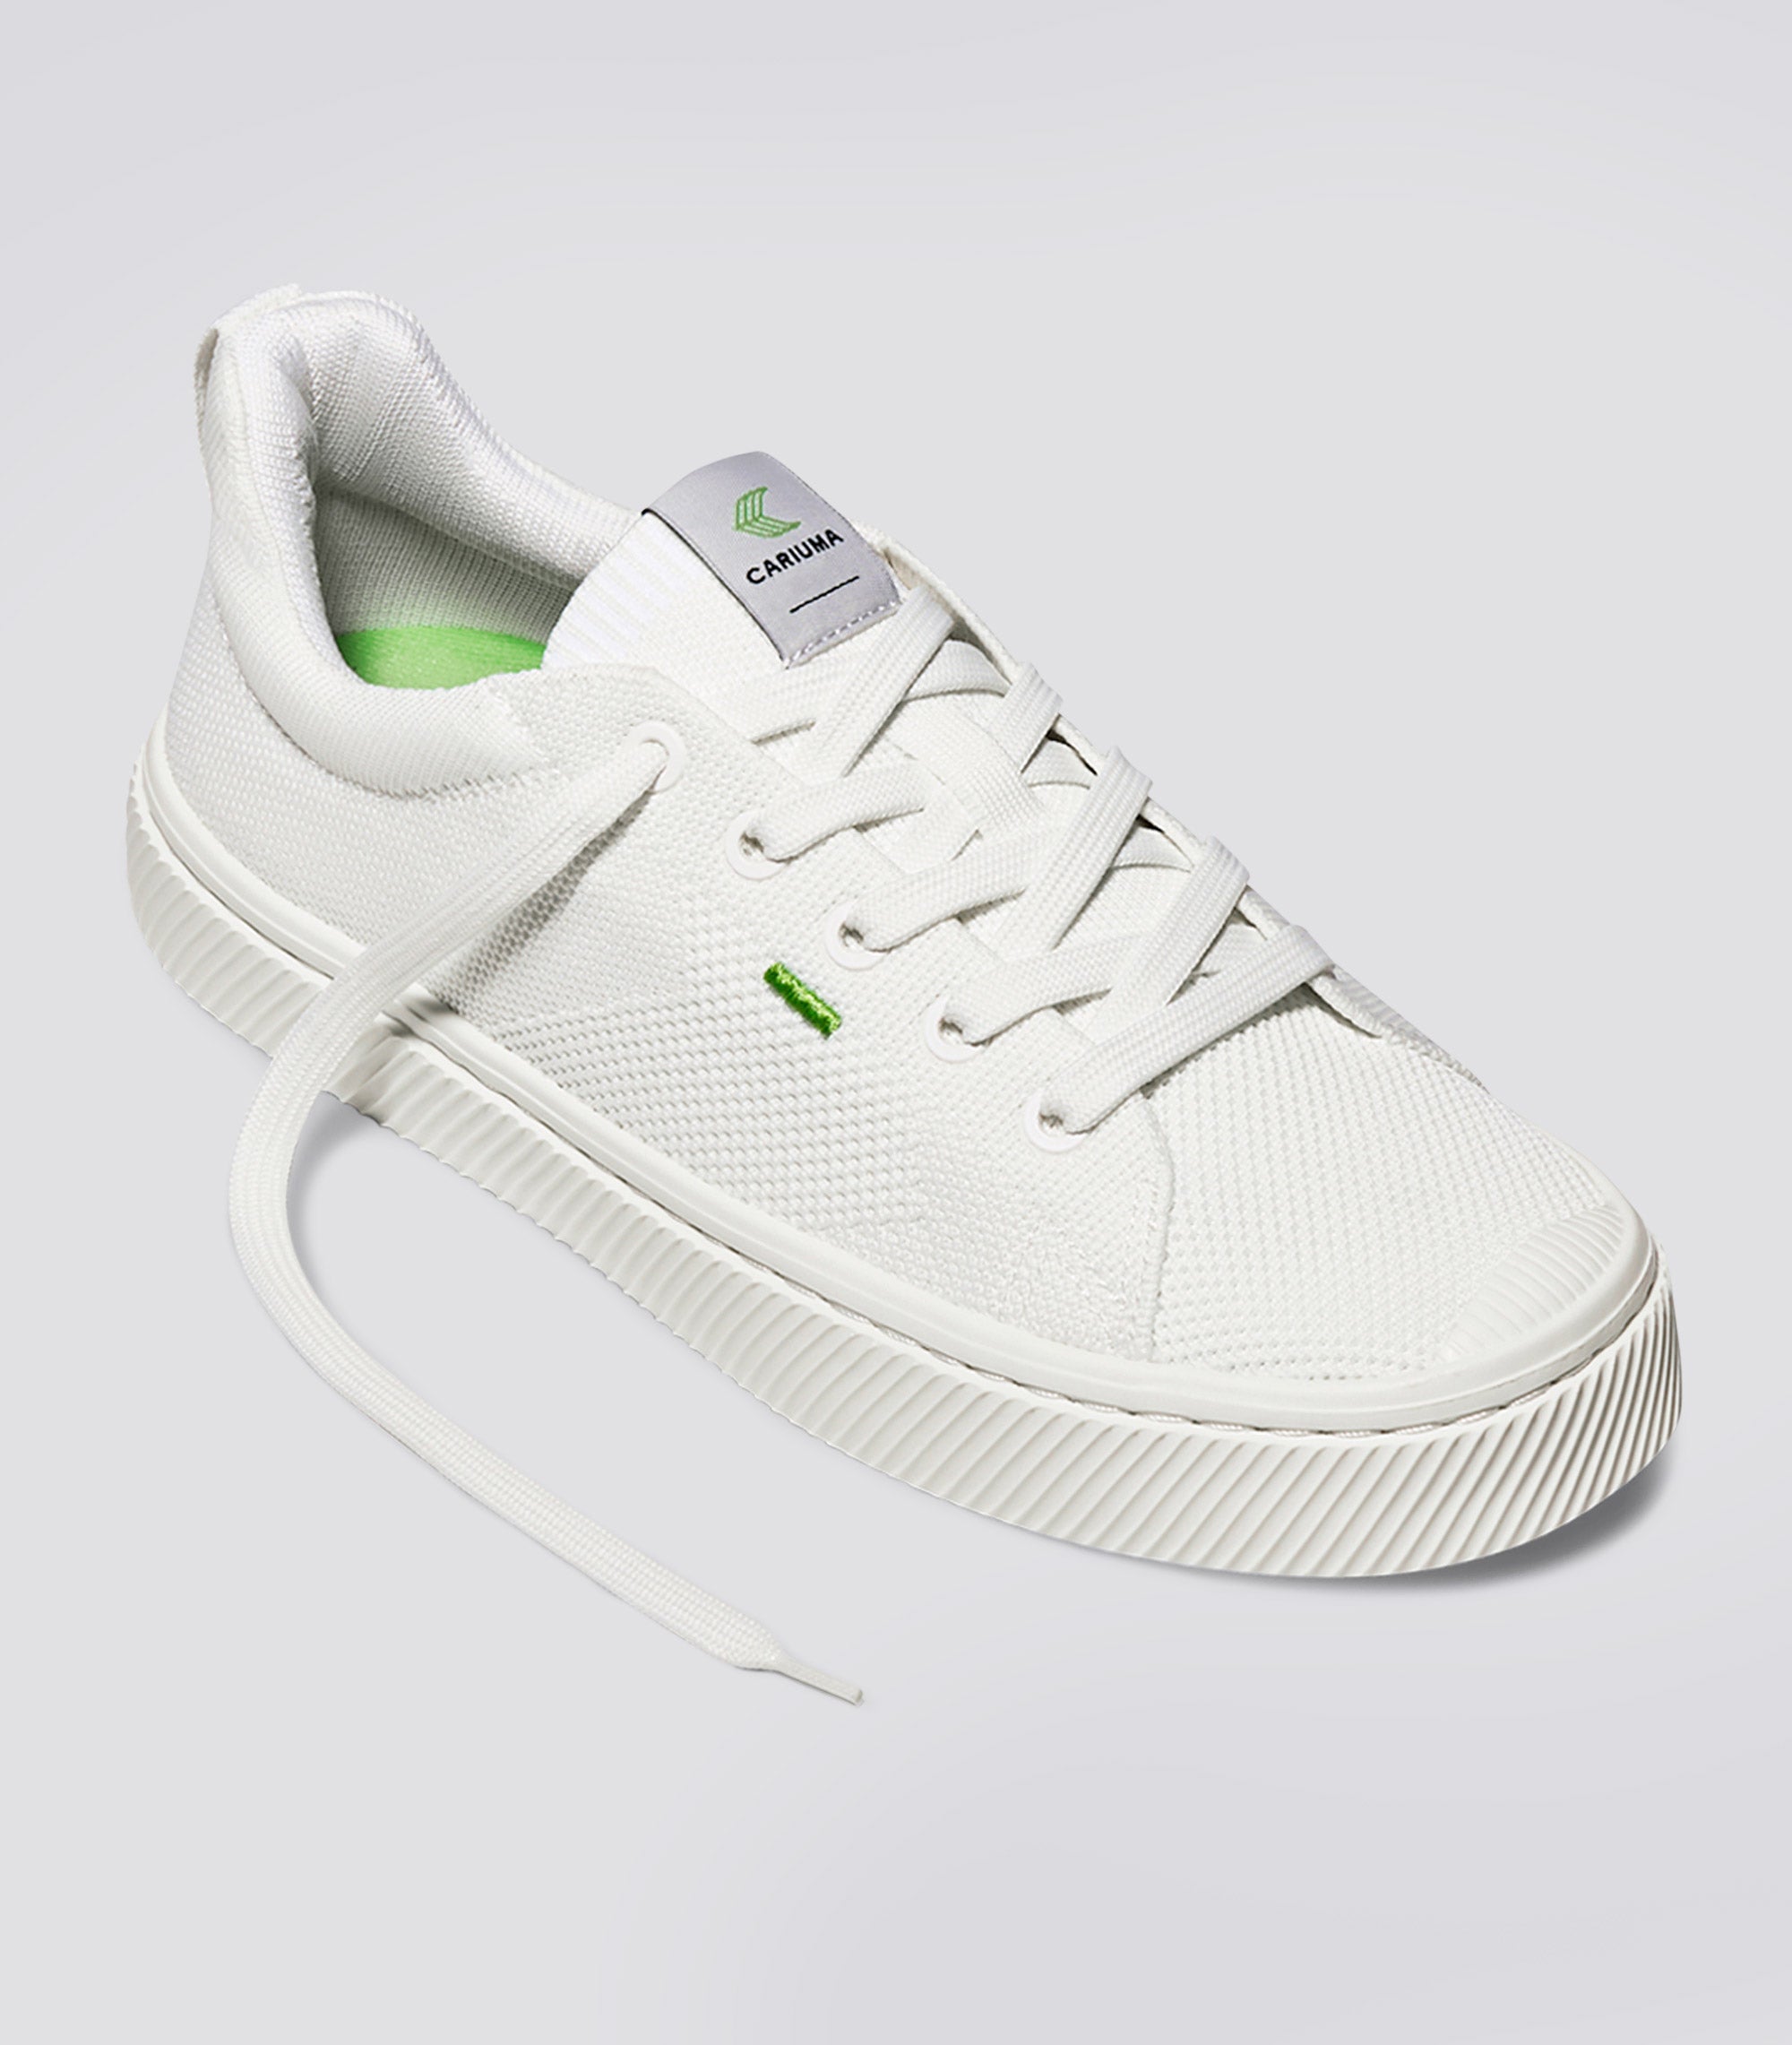 CARIUMA: Classic Women’s Sneakers | Ethically Made & Sustainable